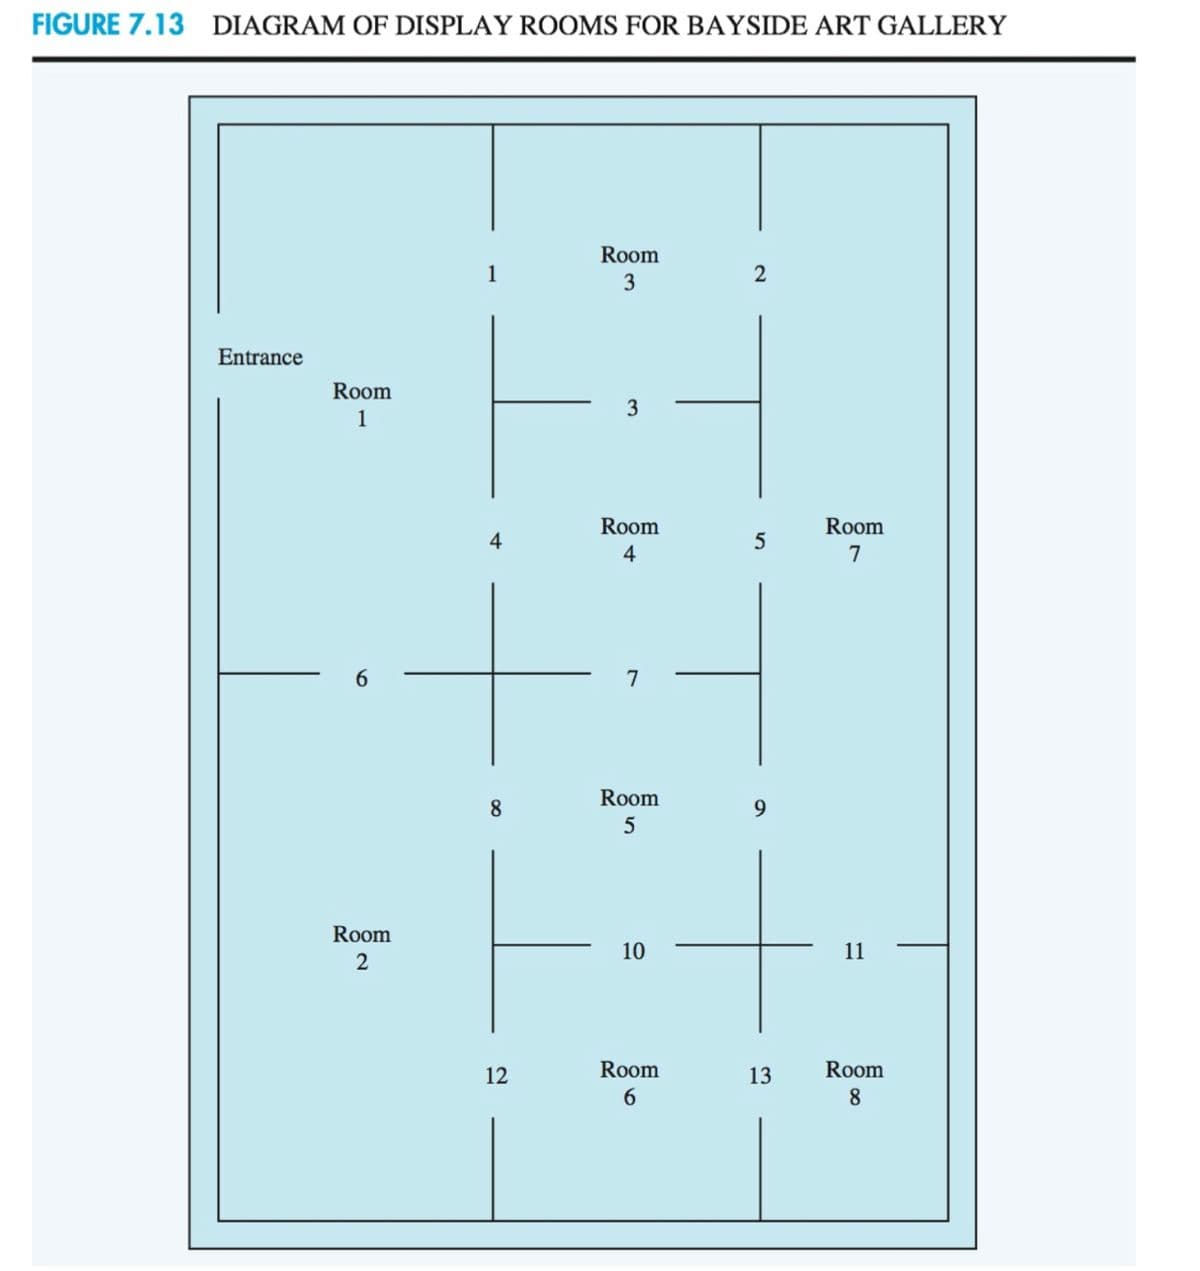 FIGURE 7.13 DIAGRAM OF DISPLAY ROOMS FOR BAYSIDE ART GALLERY
Room
3
Entrance
3
Room
4
Room
1
Room
2
4
8
12
7
Room
5
10
Room
6
5
9
13
Room
7
11
Room
8